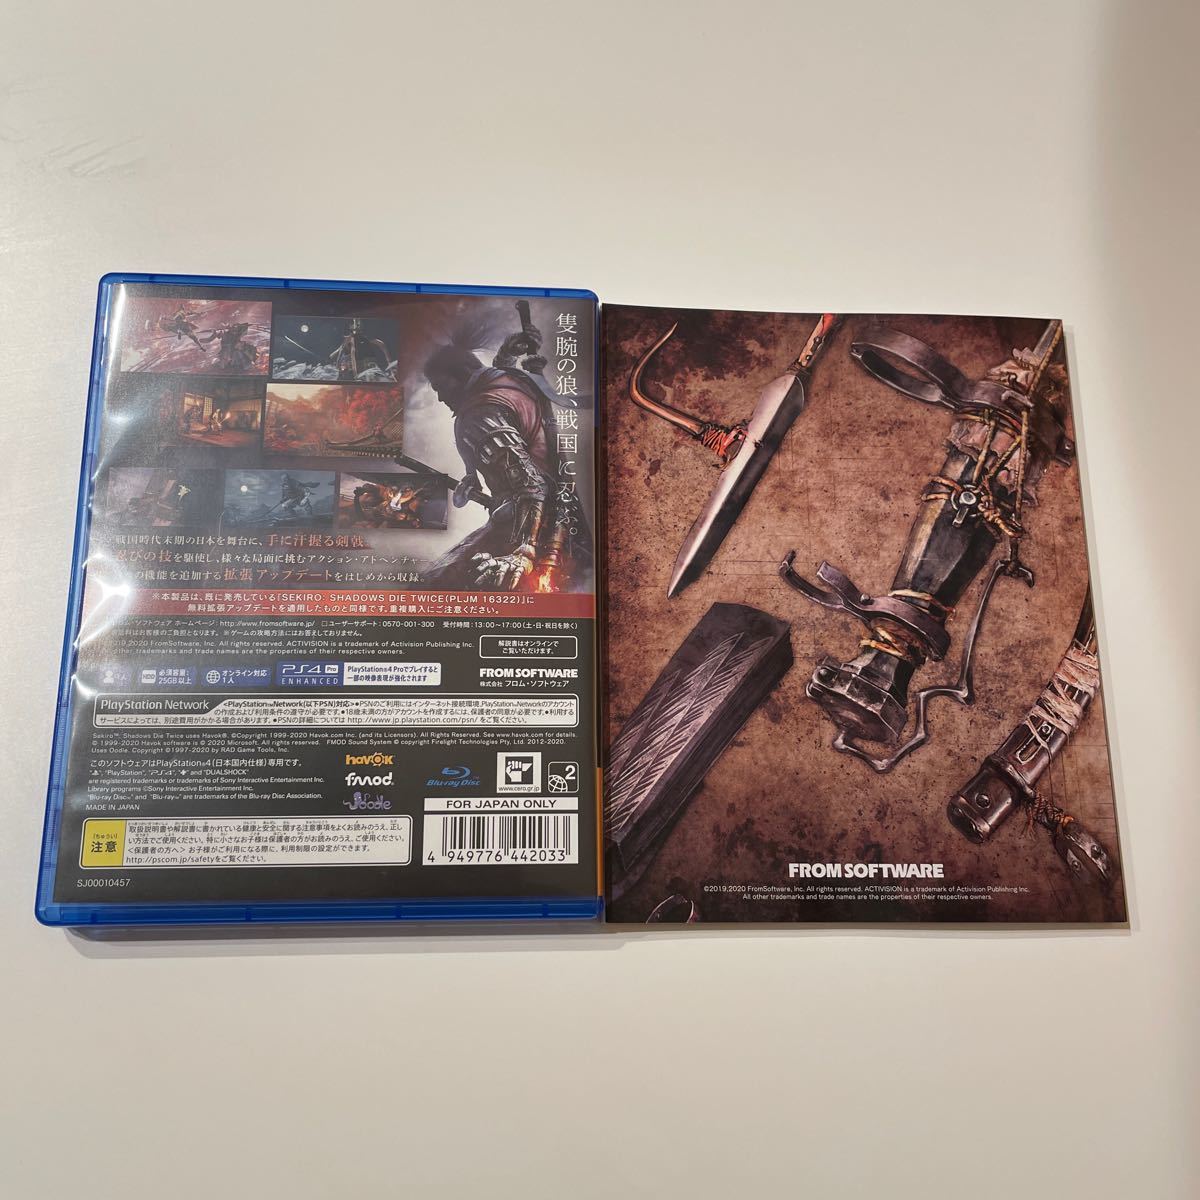 SEKIRO SHADOWS DIE TWICE GAME OF THE YEAR EDITION PS4 数量限定特典付 特装版